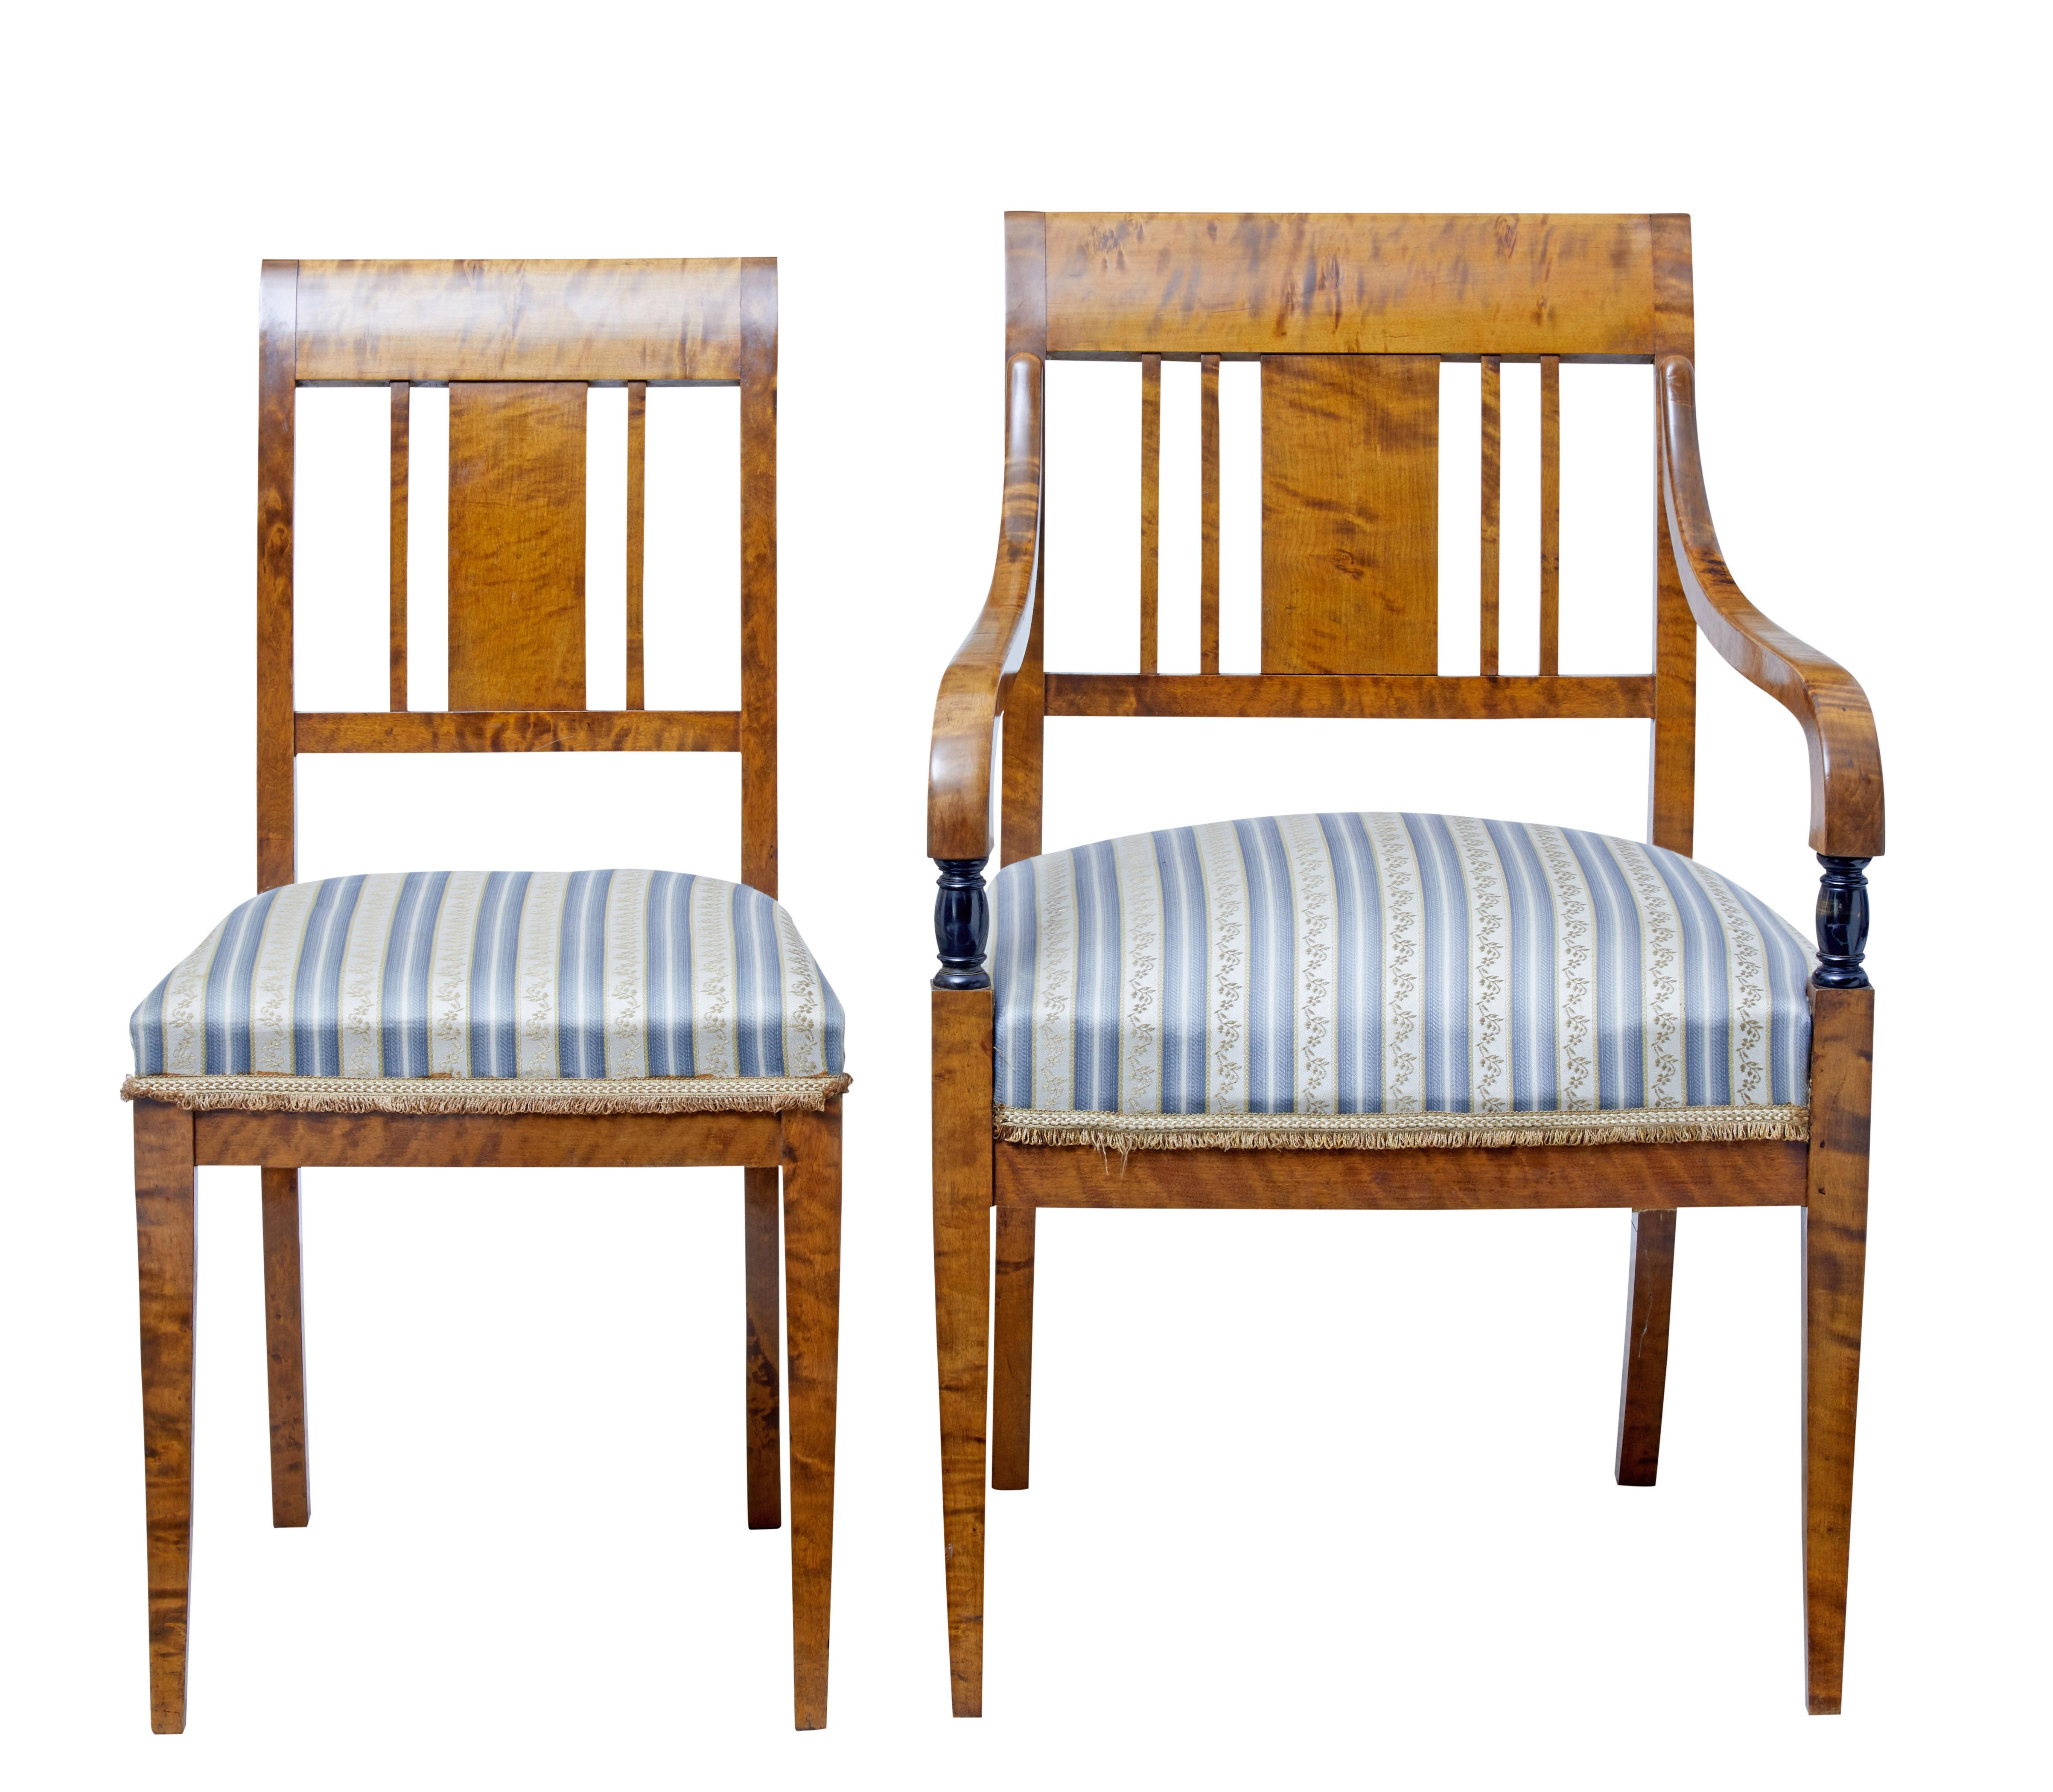 Good quality set of two arm and two single dining chairs, circa 1910.

Ideal for the home or office where a large set is not needed.

Burr birch with elegant backrest design. Shaped arm on the carvers which leads down to an ebonized